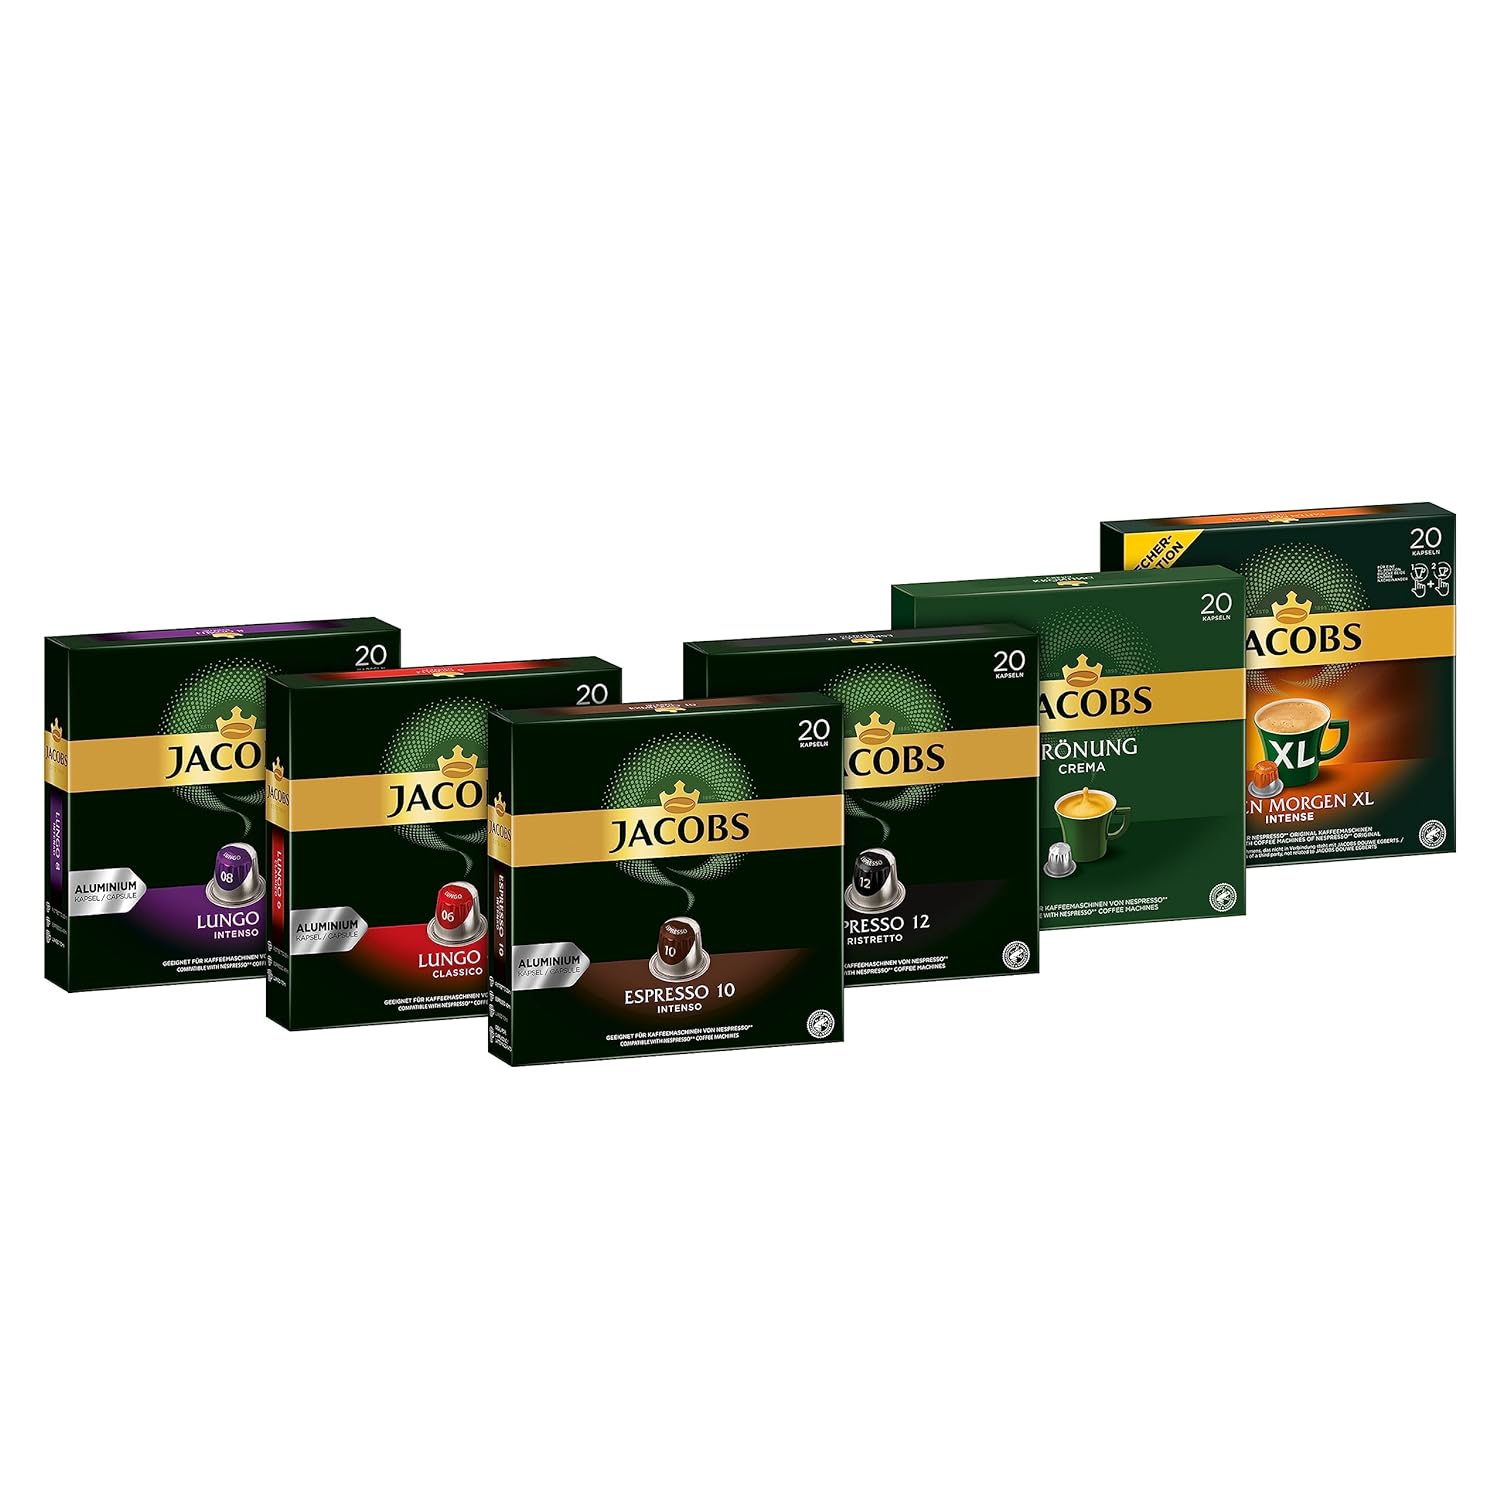 Jacobs Capsules Variety Pack - 120 Nespresso® Compatible Aluminum Coffee Capsules - 6 Different Types (6 x 20 Capsules)